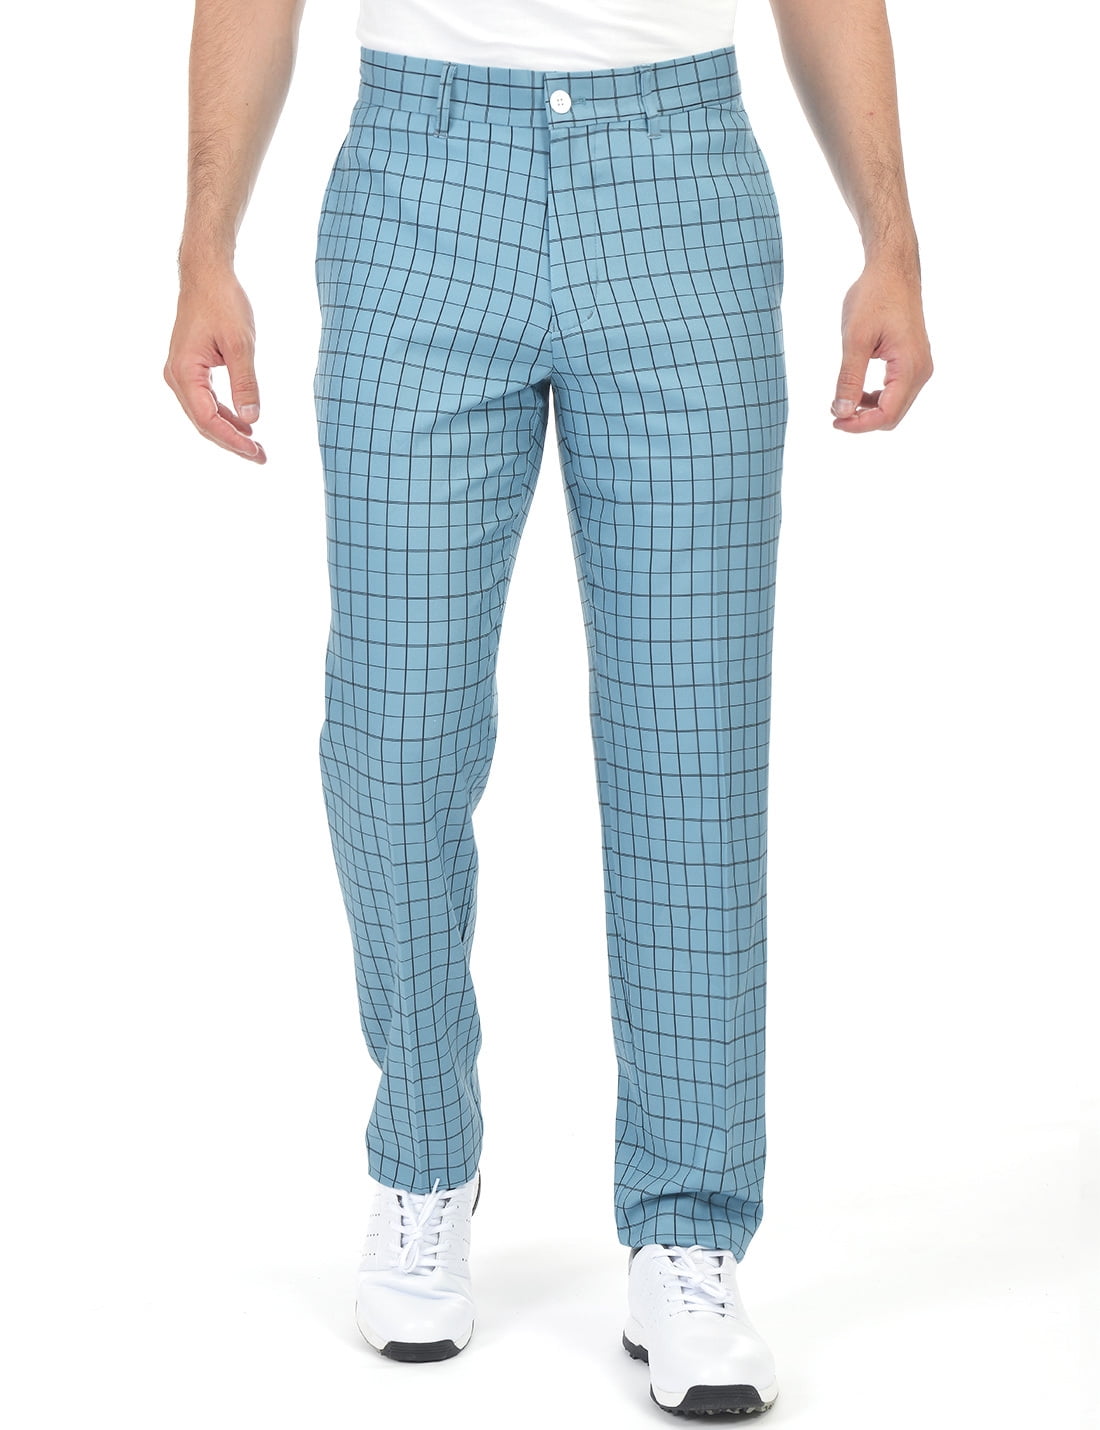 Men's Golf Tapered Pants Plaid Stretch Relaxed Fit Lightweight Flat ...